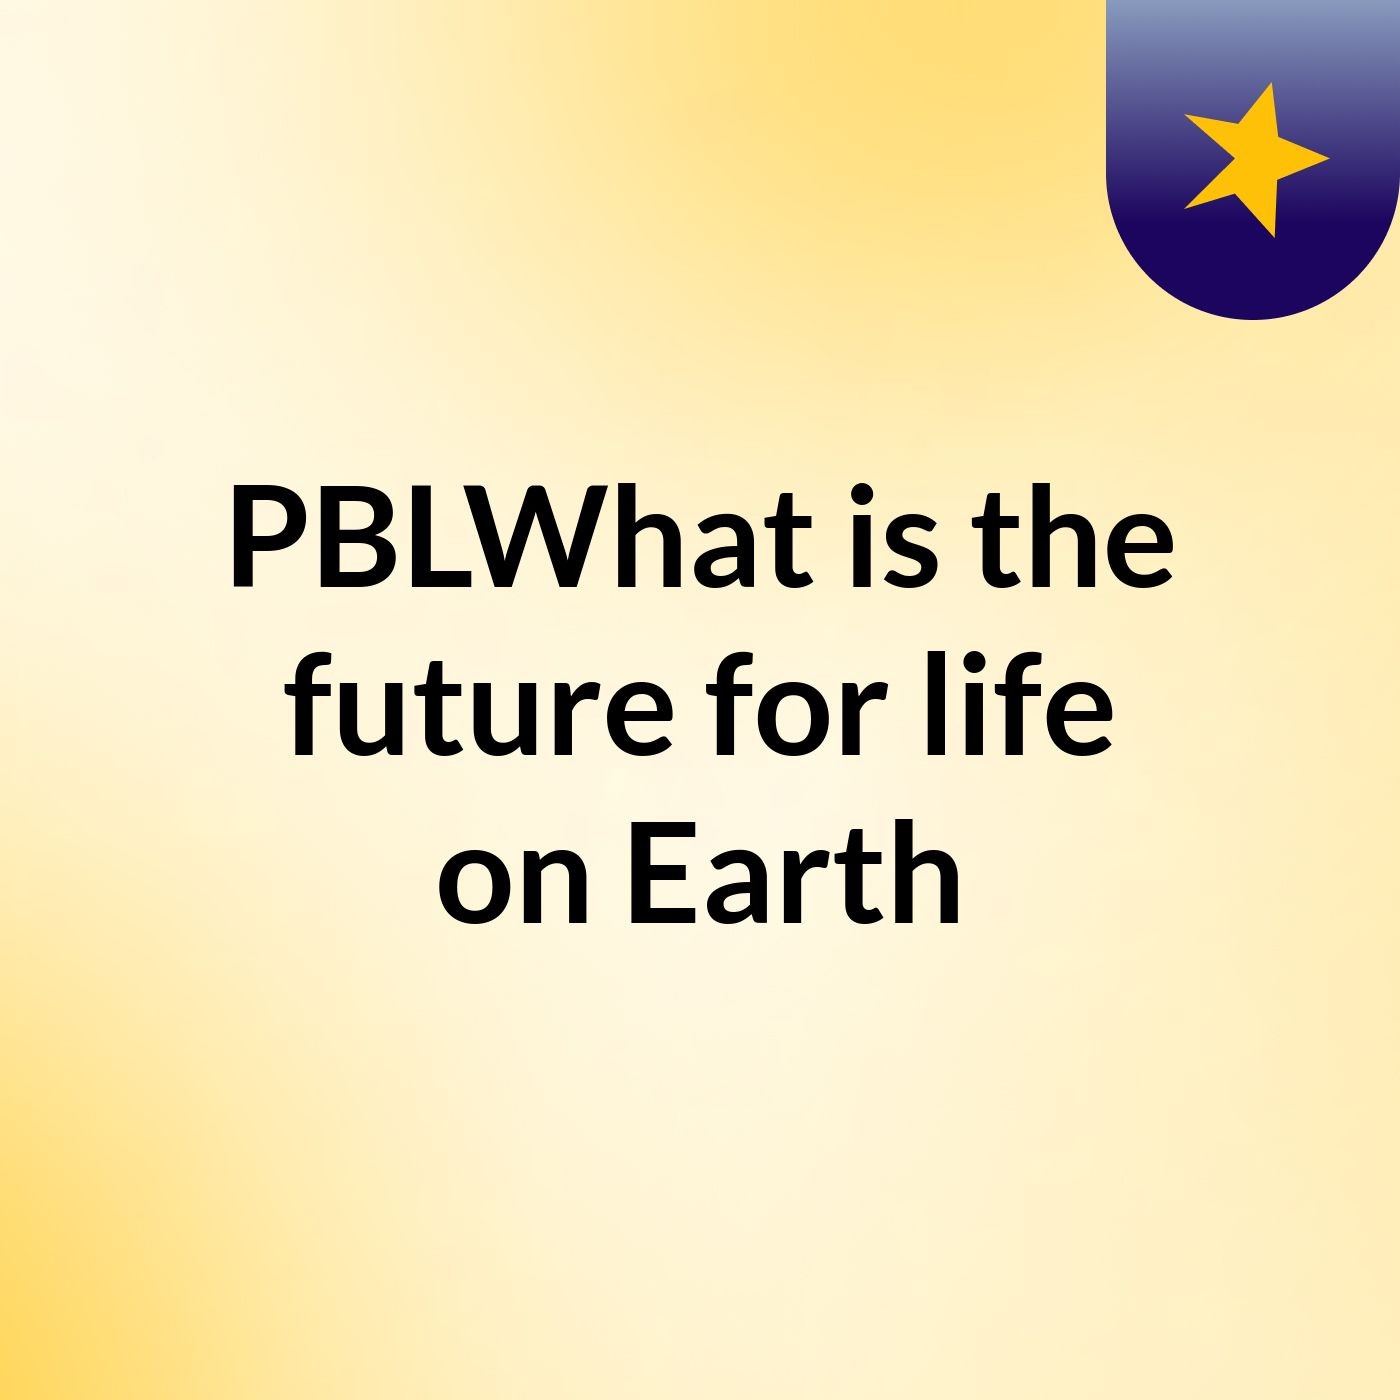 PBLWhat is the future for life on Earth?